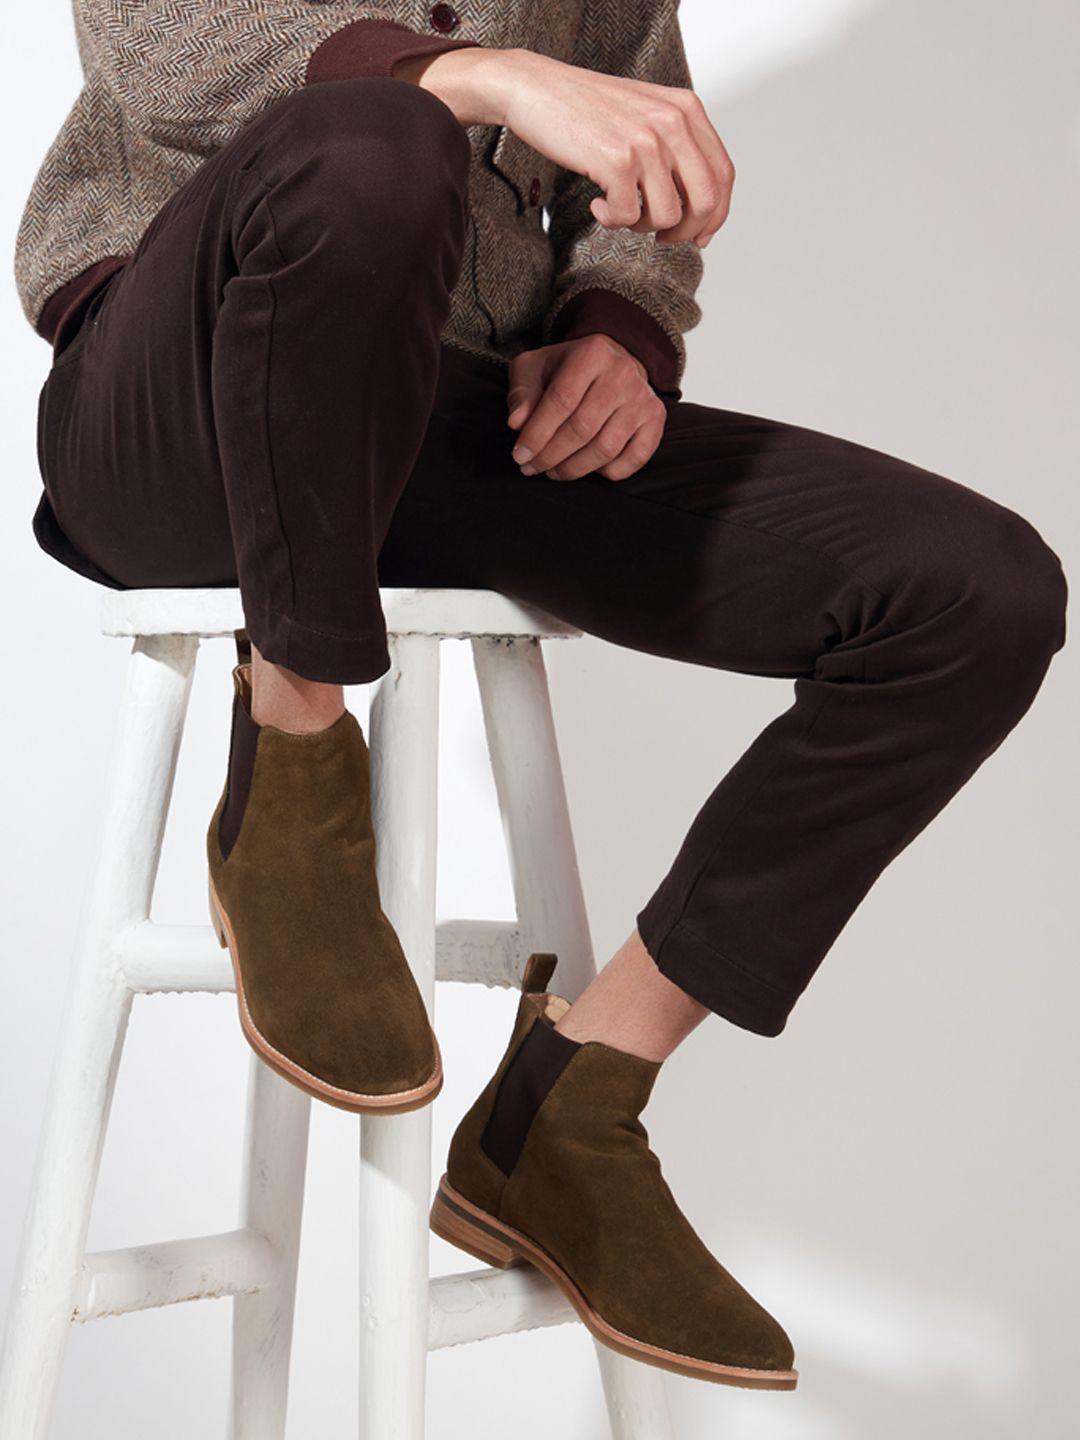 saint g men olive brown solid mid-top chelsea boots